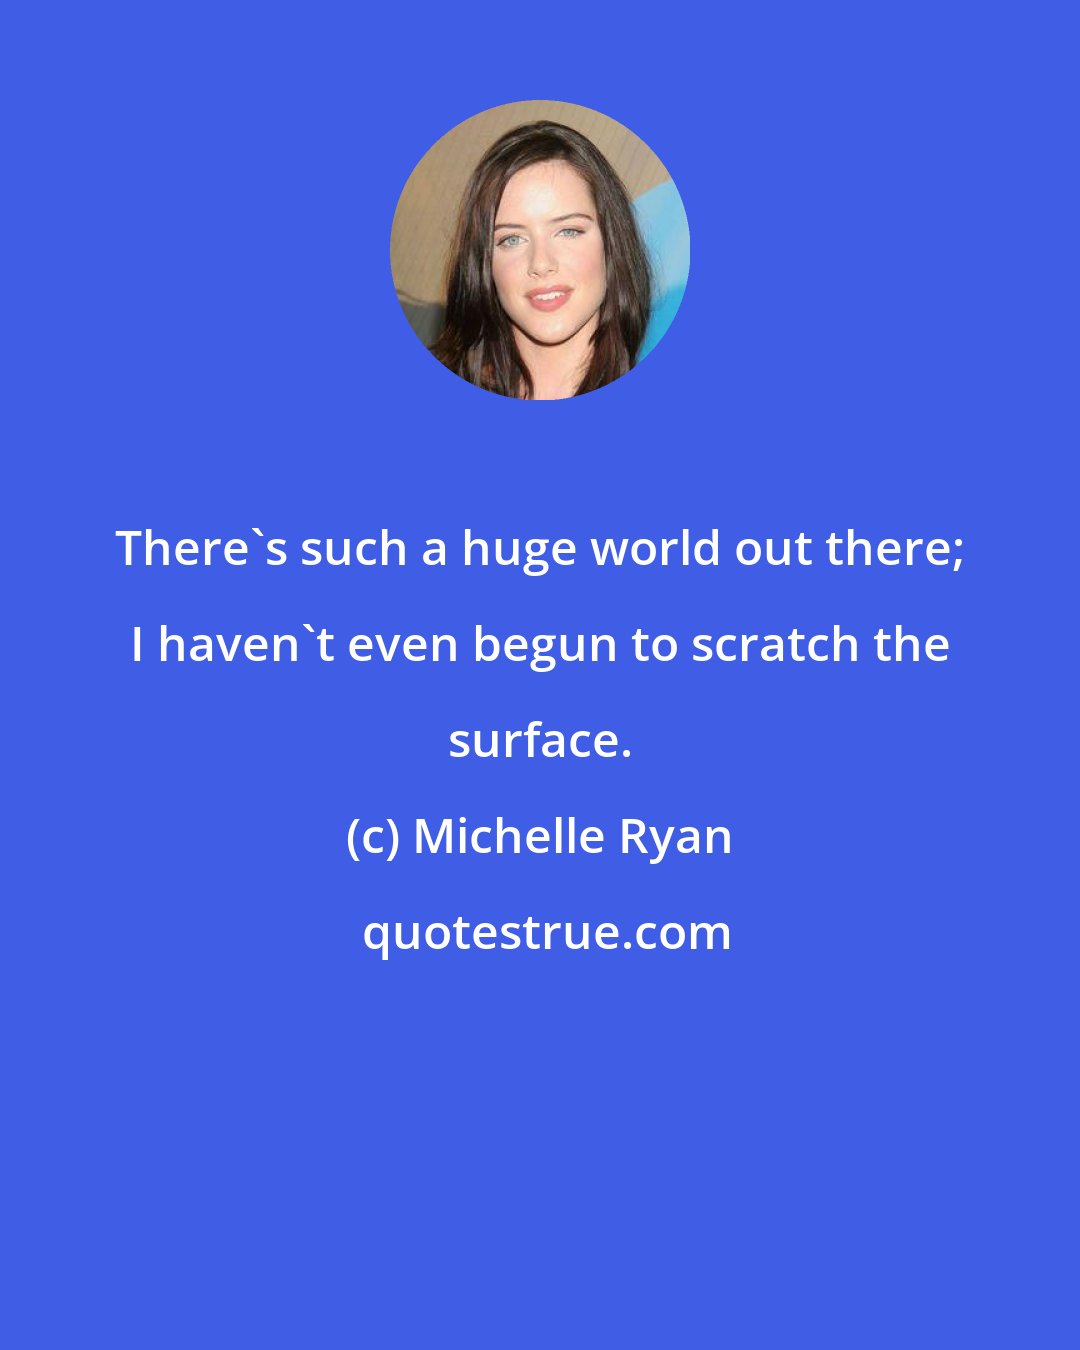 Michelle Ryan: There's such a huge world out there; I haven't even begun to scratch the surface.